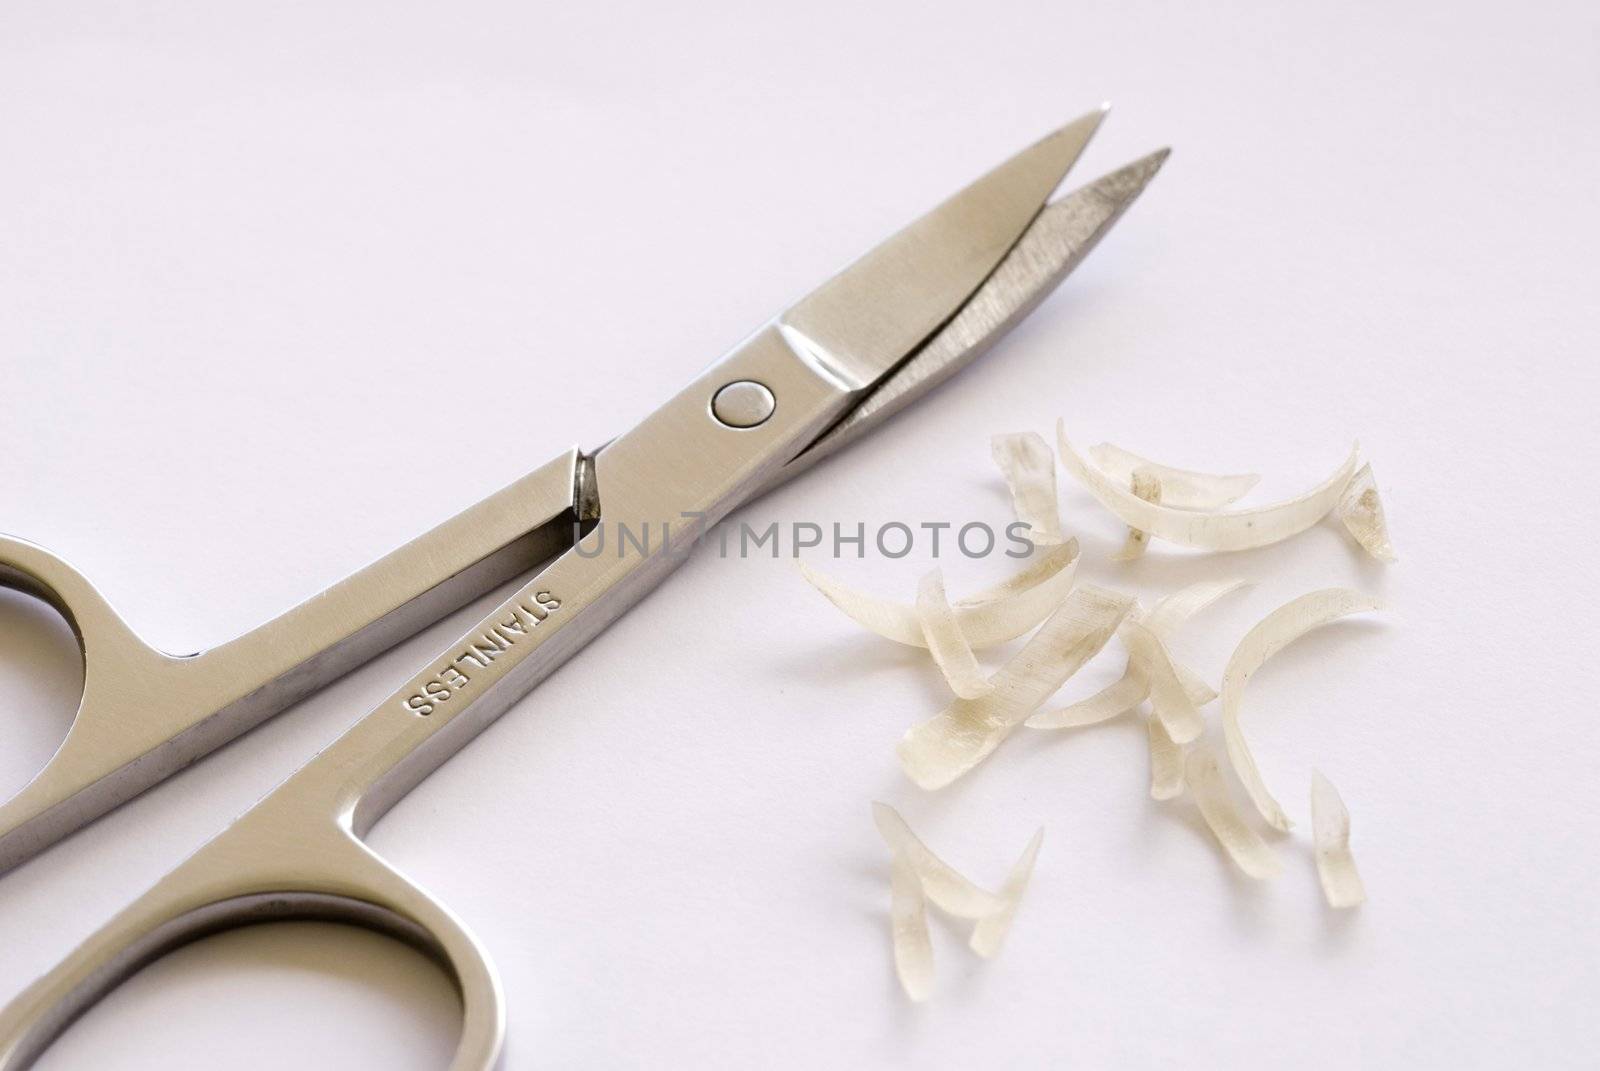 a pair of curved nail scissors and some nail clippings